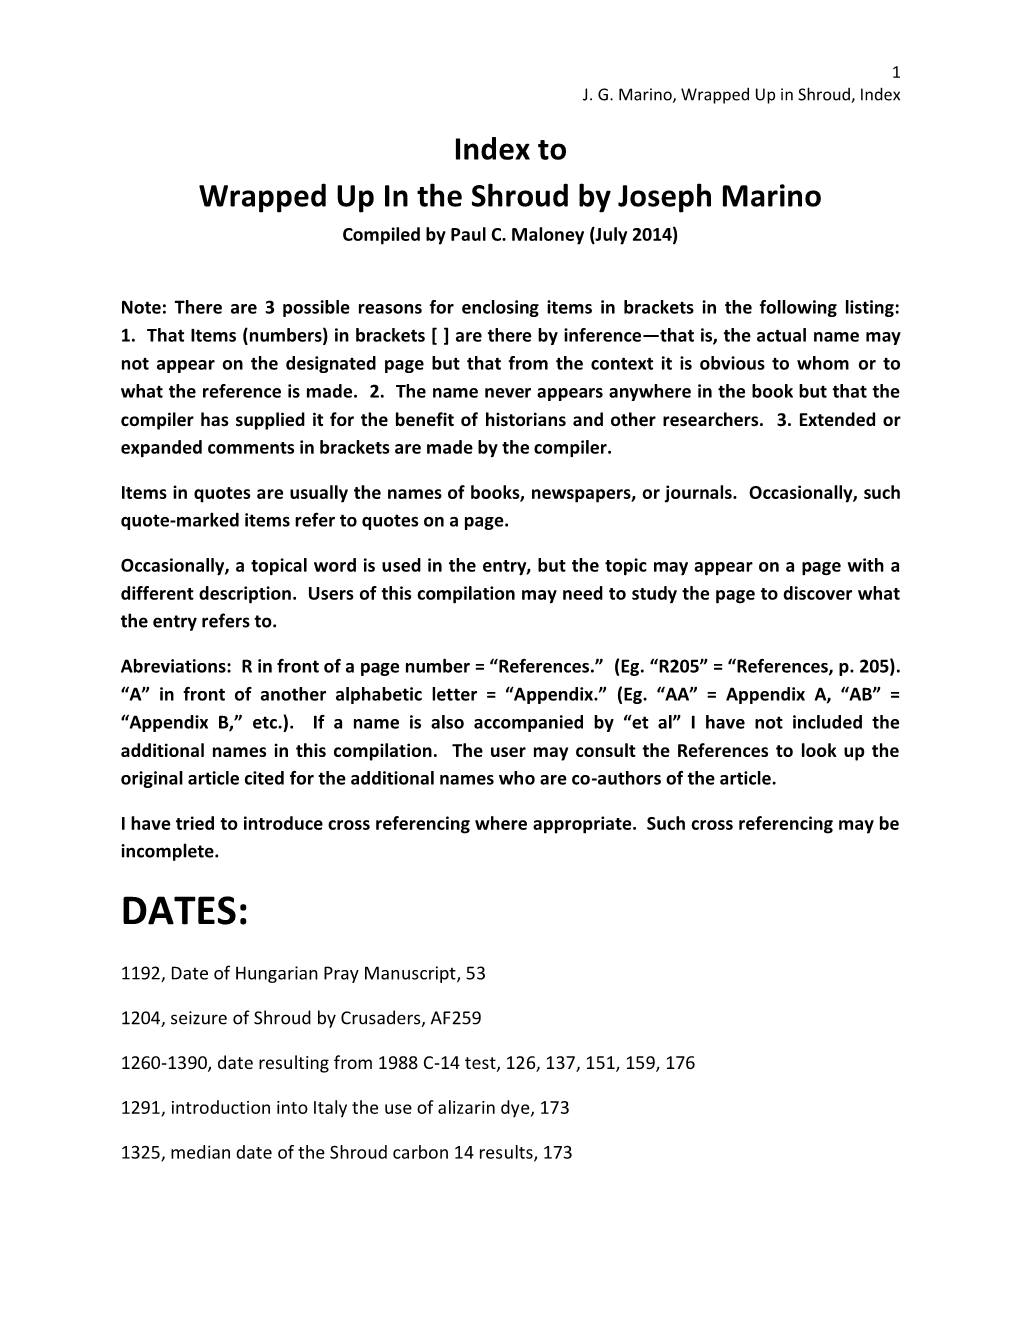 Index to Wrapped up in the Shroud by Joseph Marino Compiled by Paul C